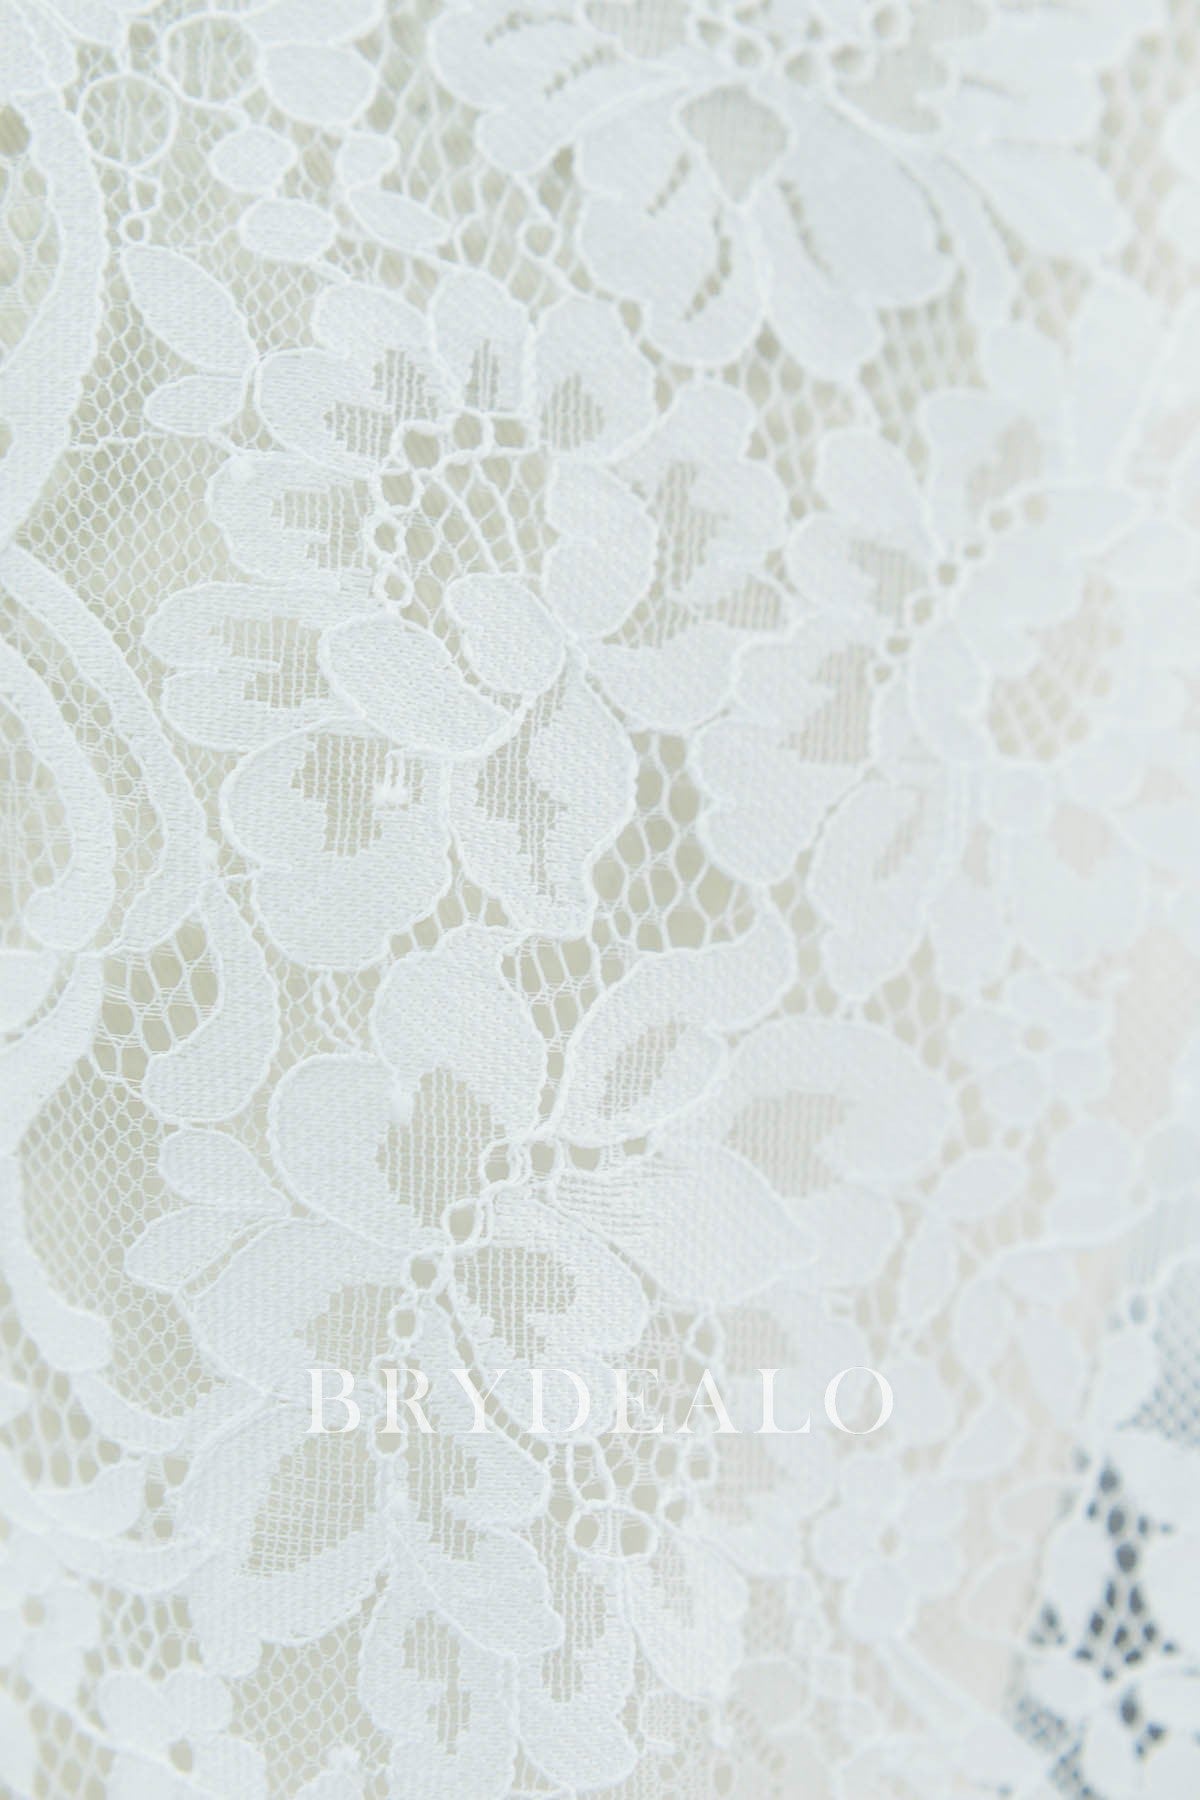 Popular Gridding Motif Corded Scallop Lace Fabric